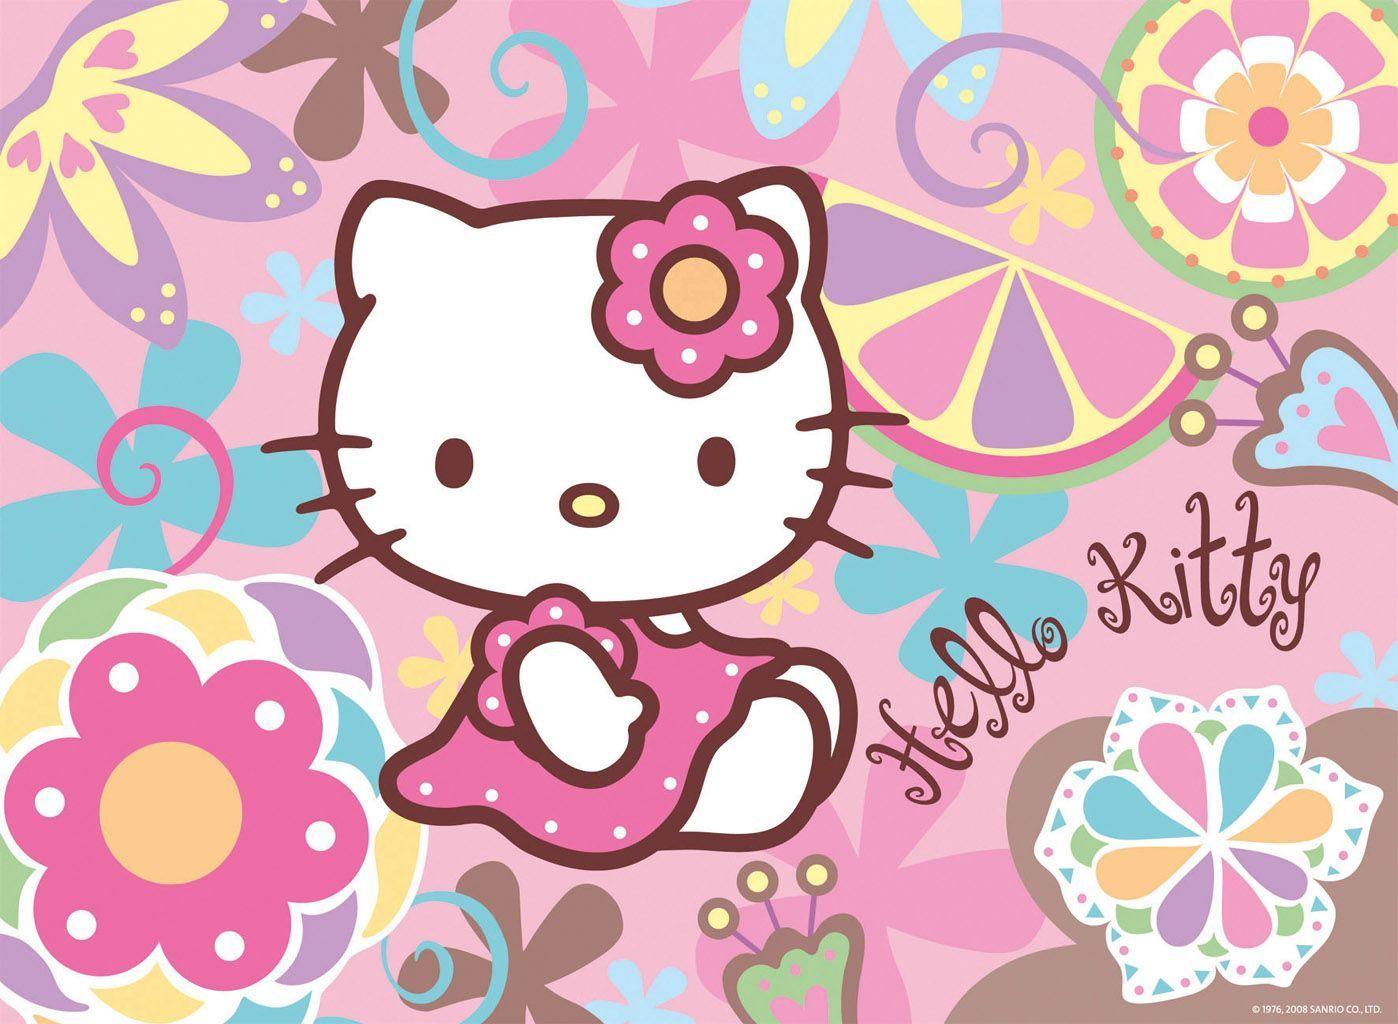 Download Hello Kitty Picture Picture Wallpaper 1398x1024. Full